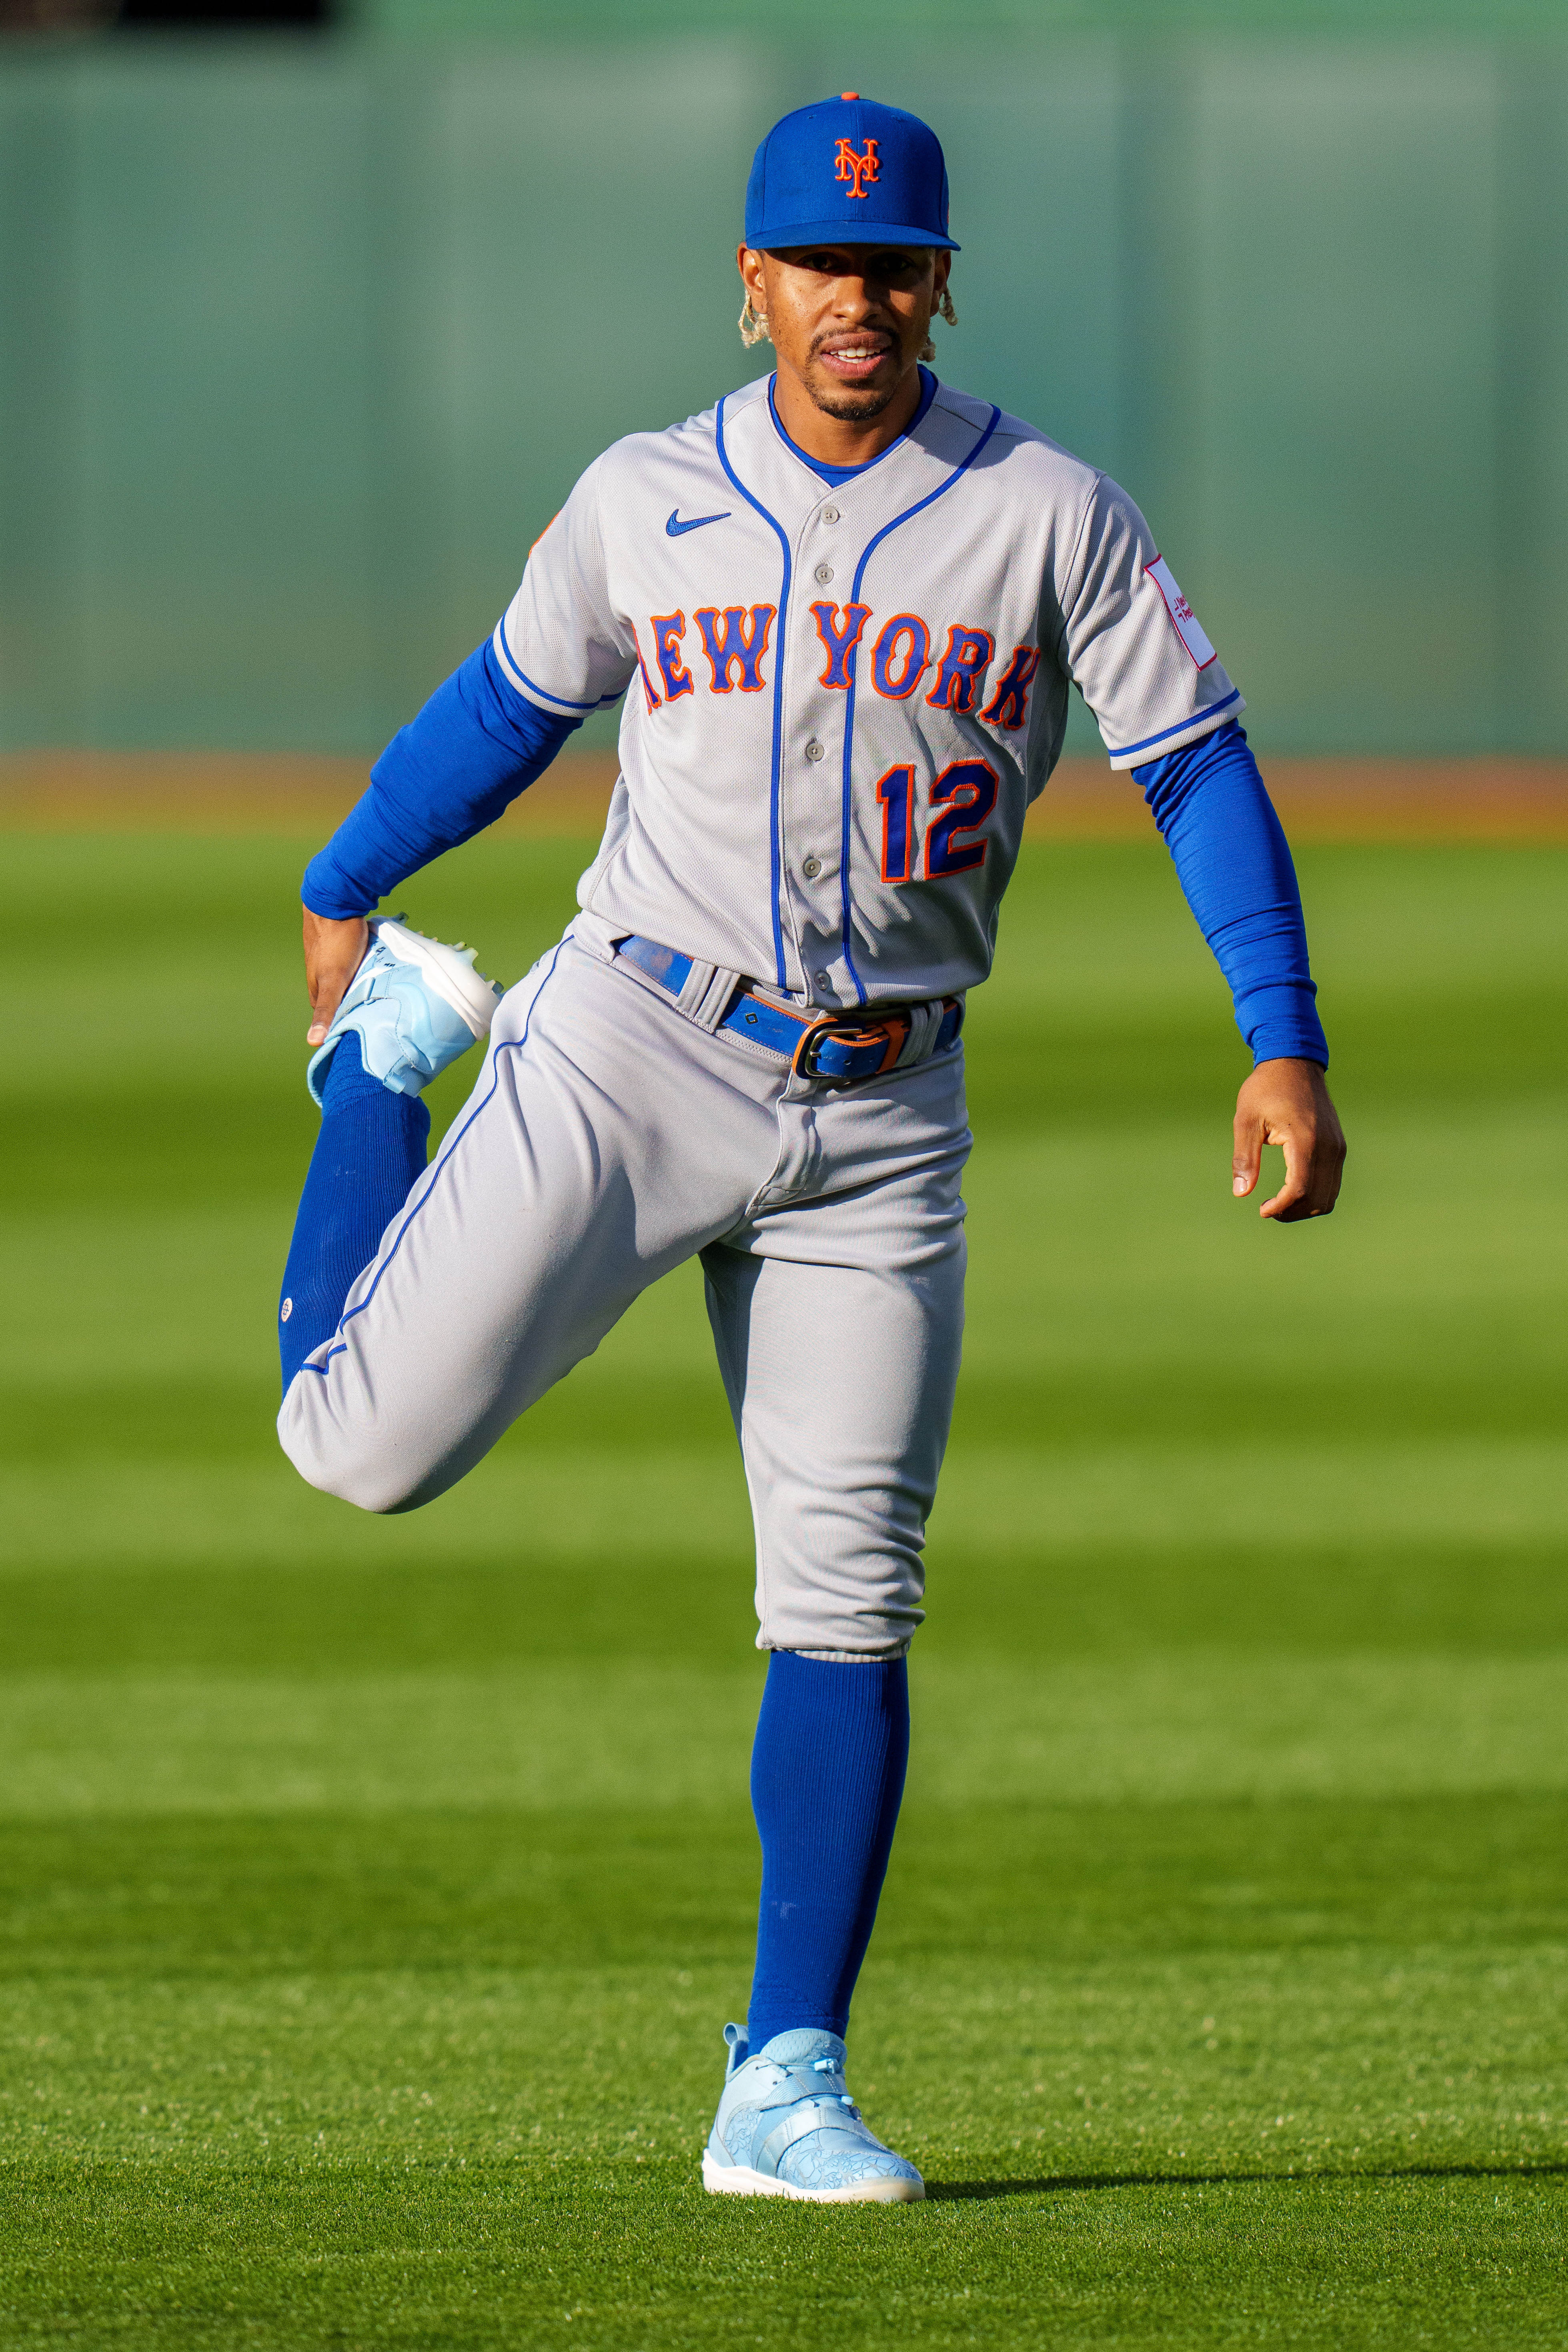 Lindor hits grand slam, drives in 7 as Mets beat A's 17-6 National News -  Bally Sports